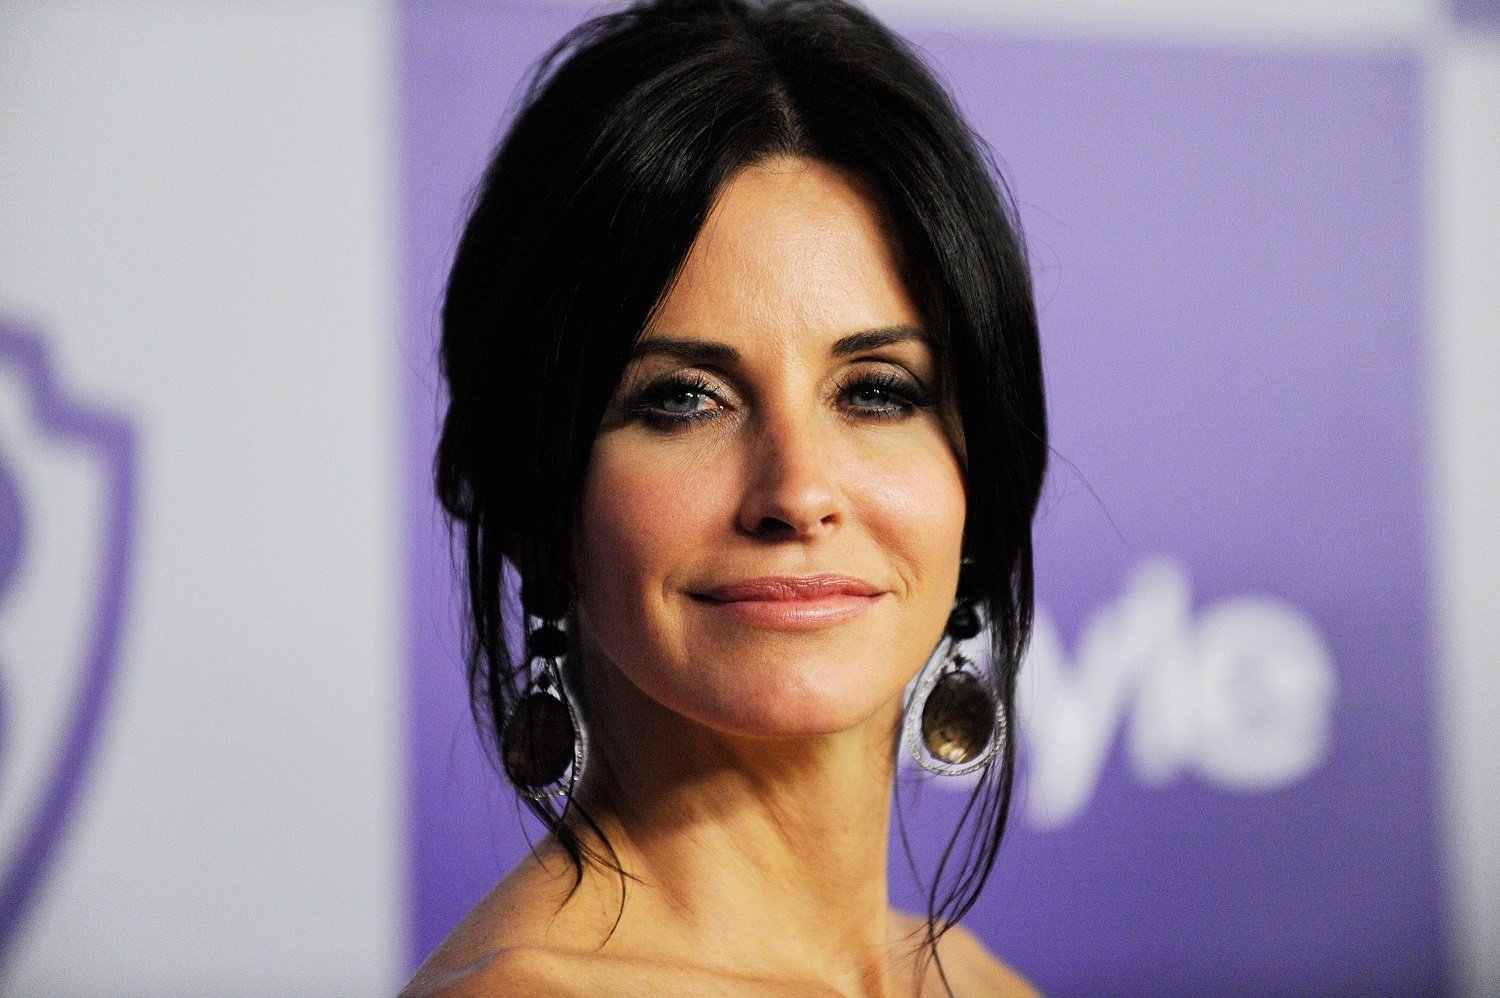 courteney cox now and then